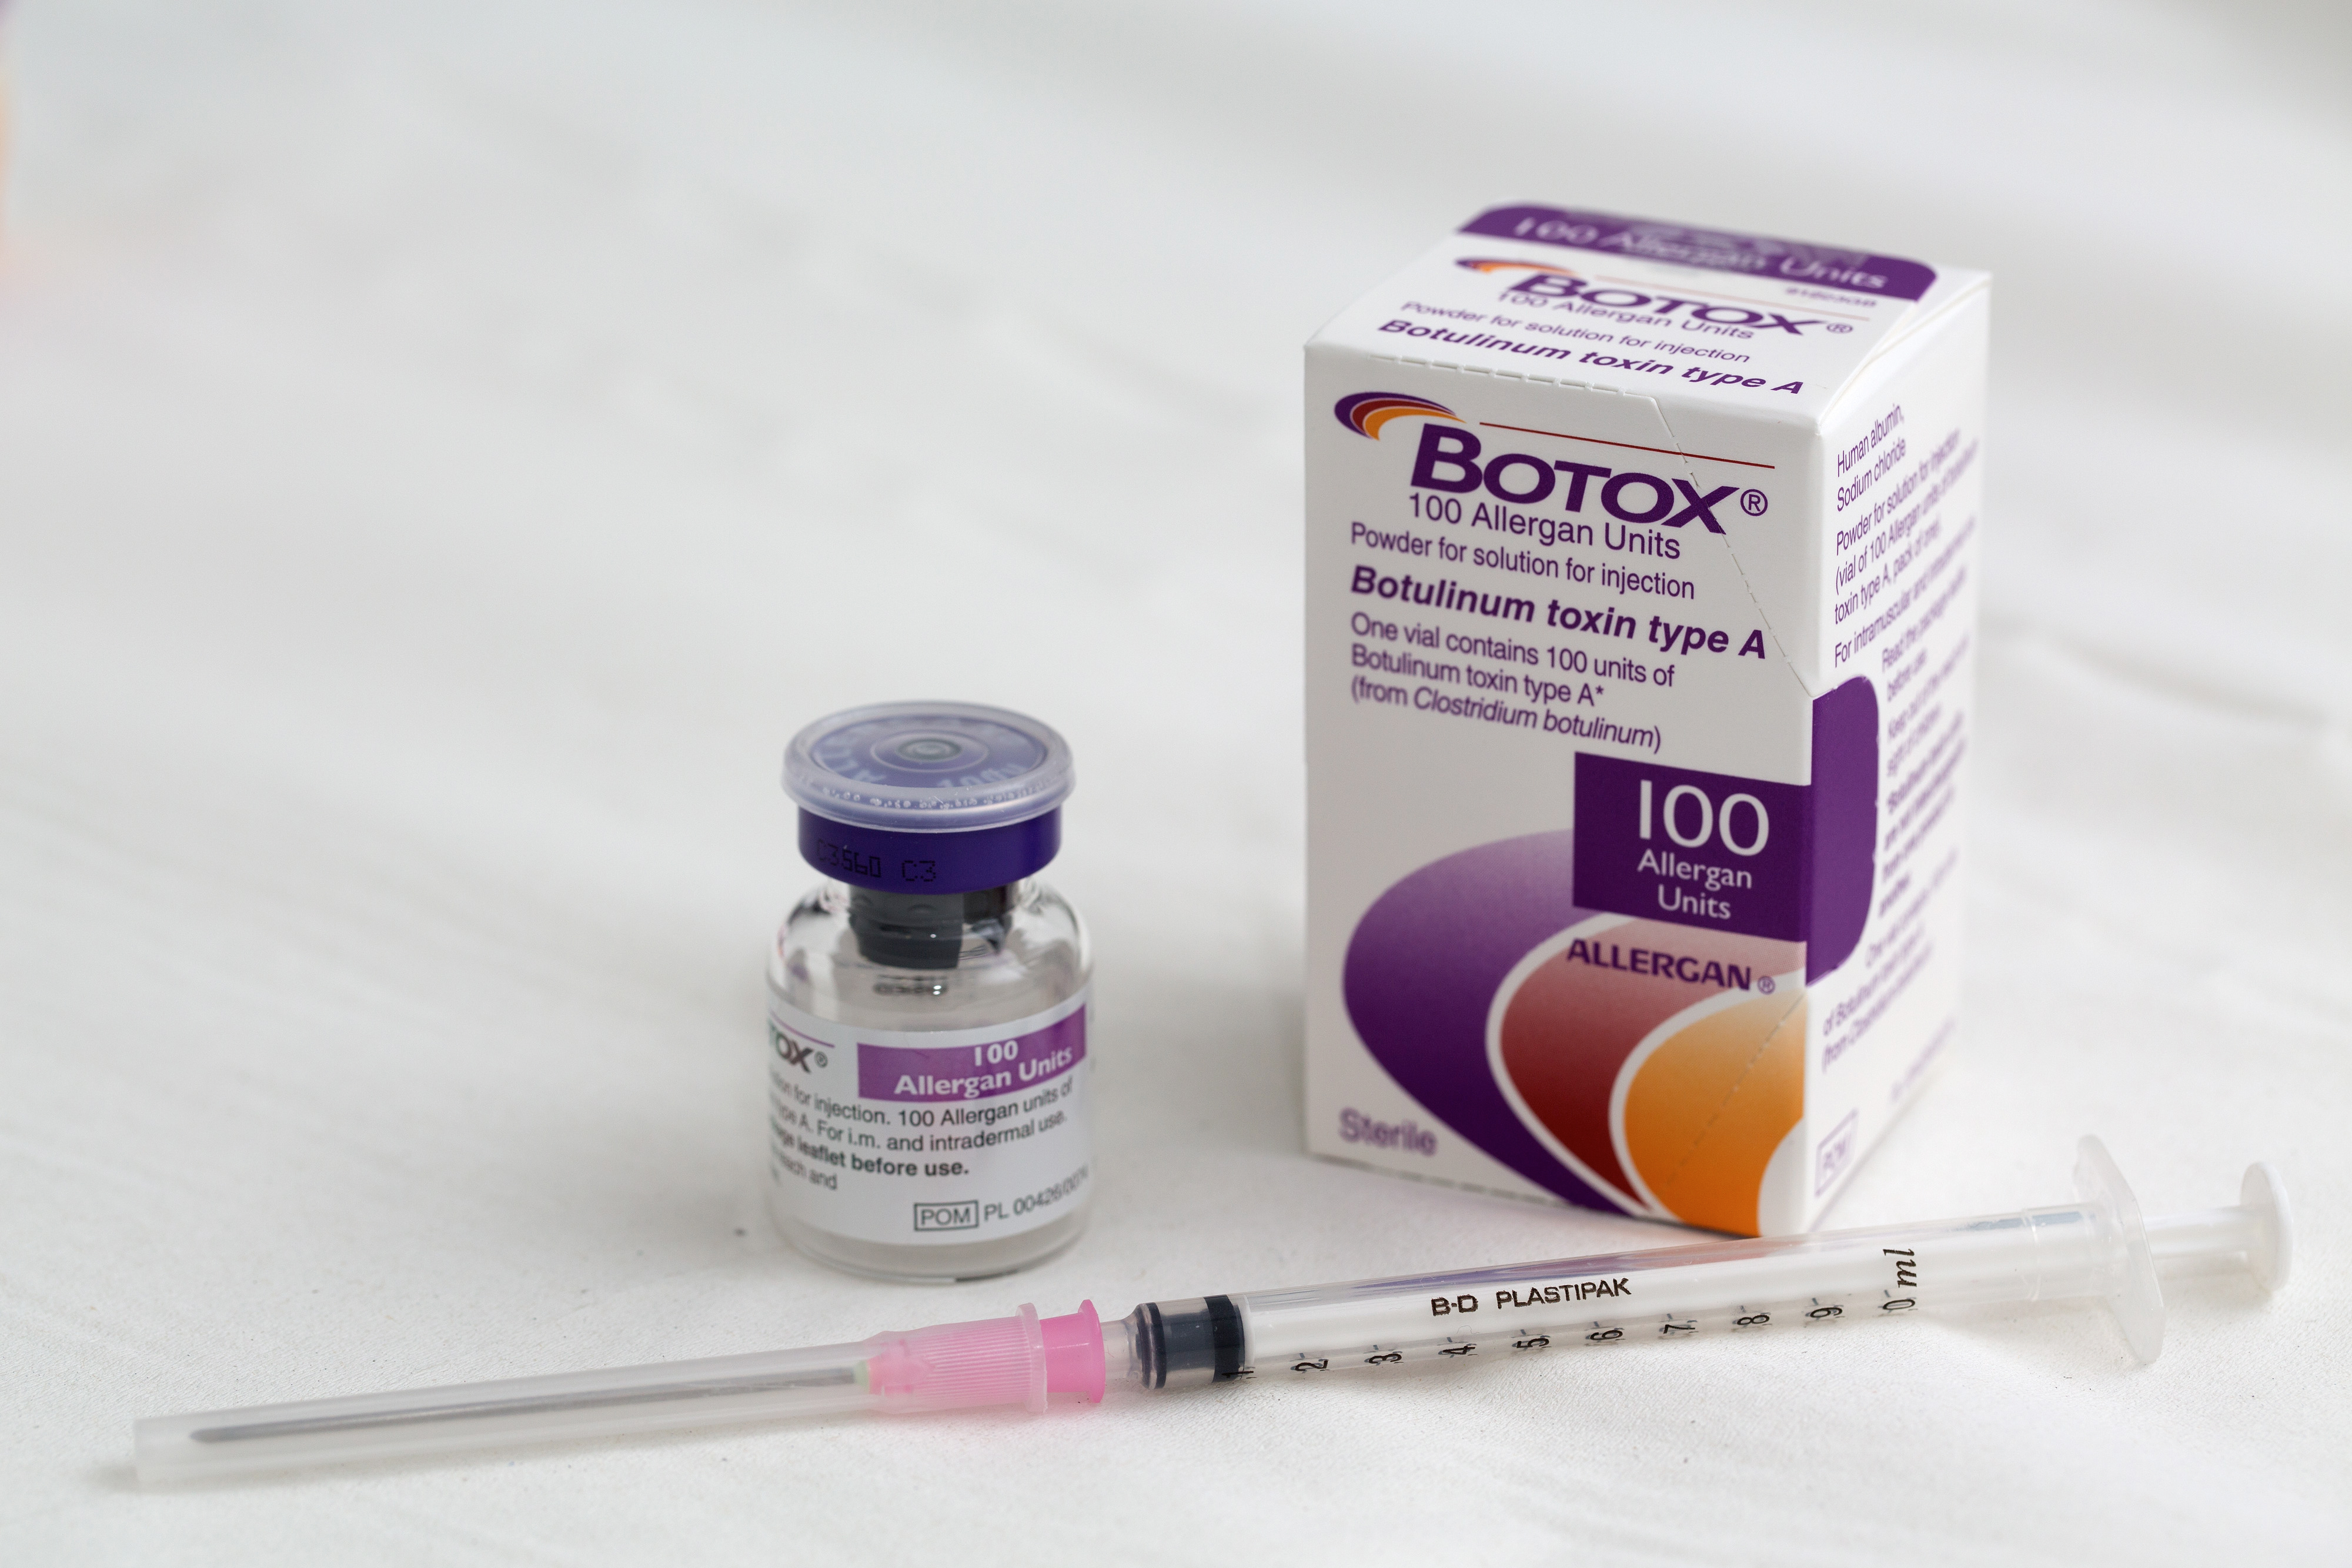 A syringe rests alongside a vial of Allergan Botox, produced by Allergan Inc.